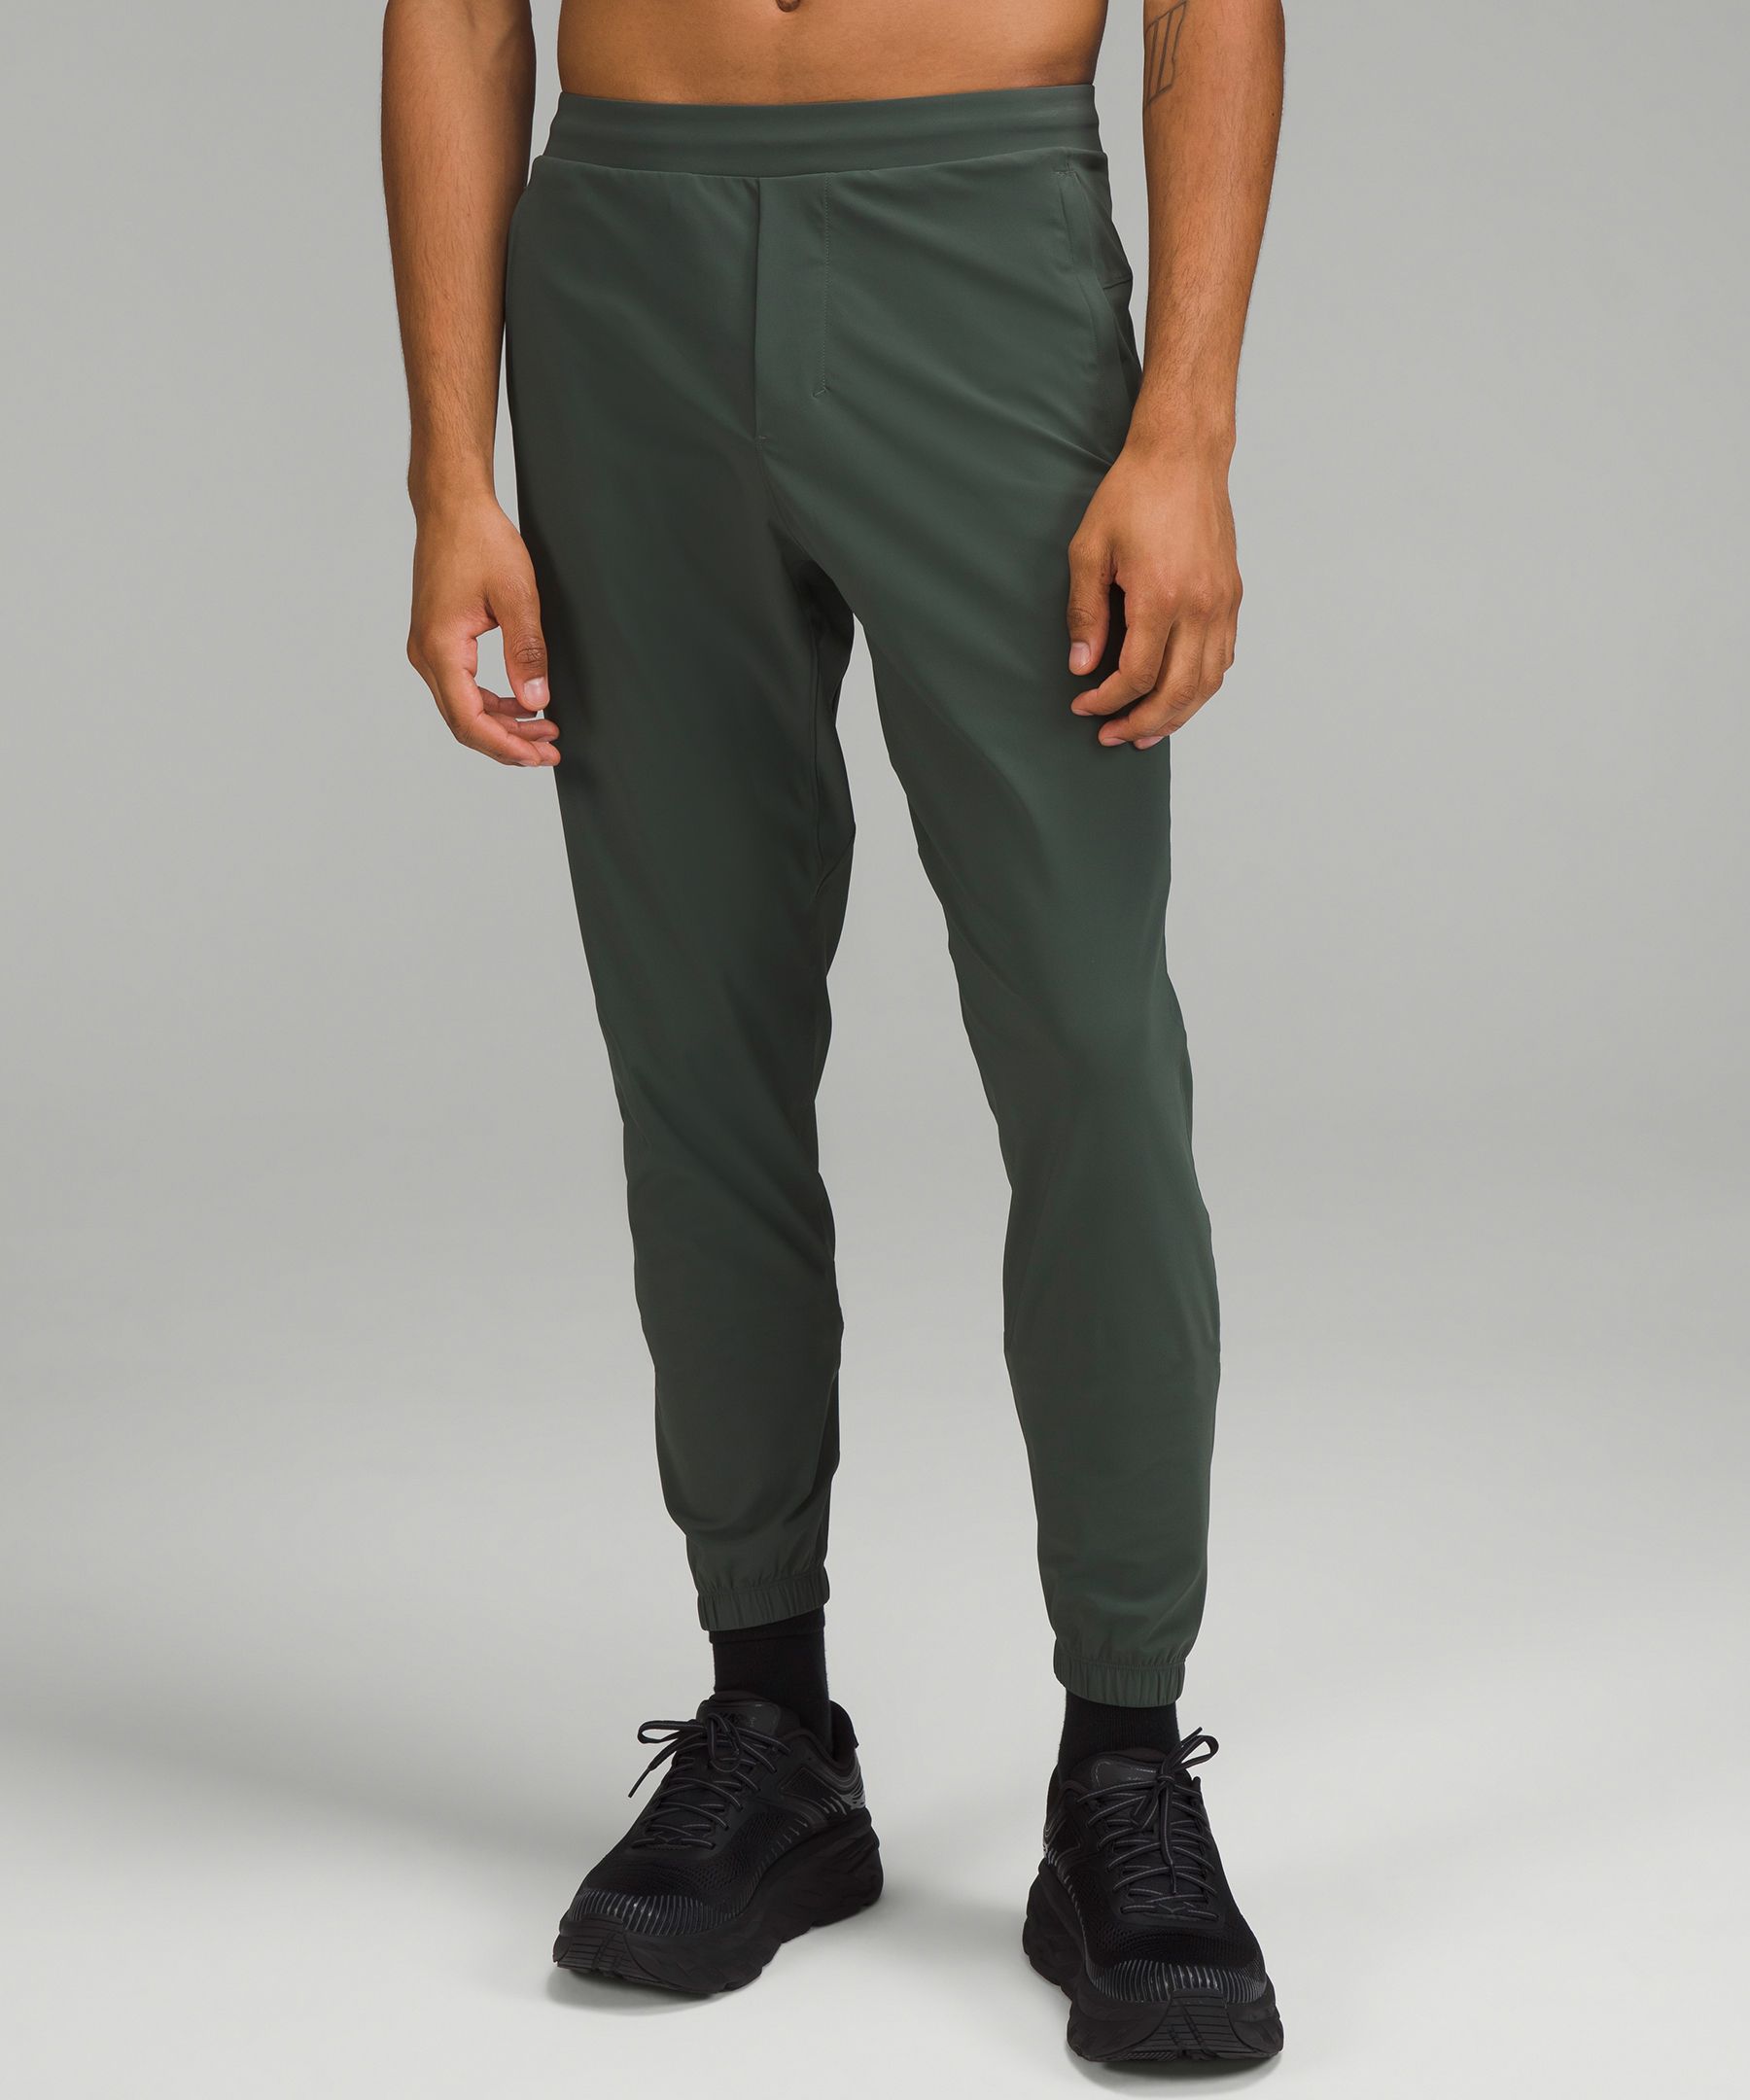 Lululemon Surge Joggers Tall In Smoked Spruce